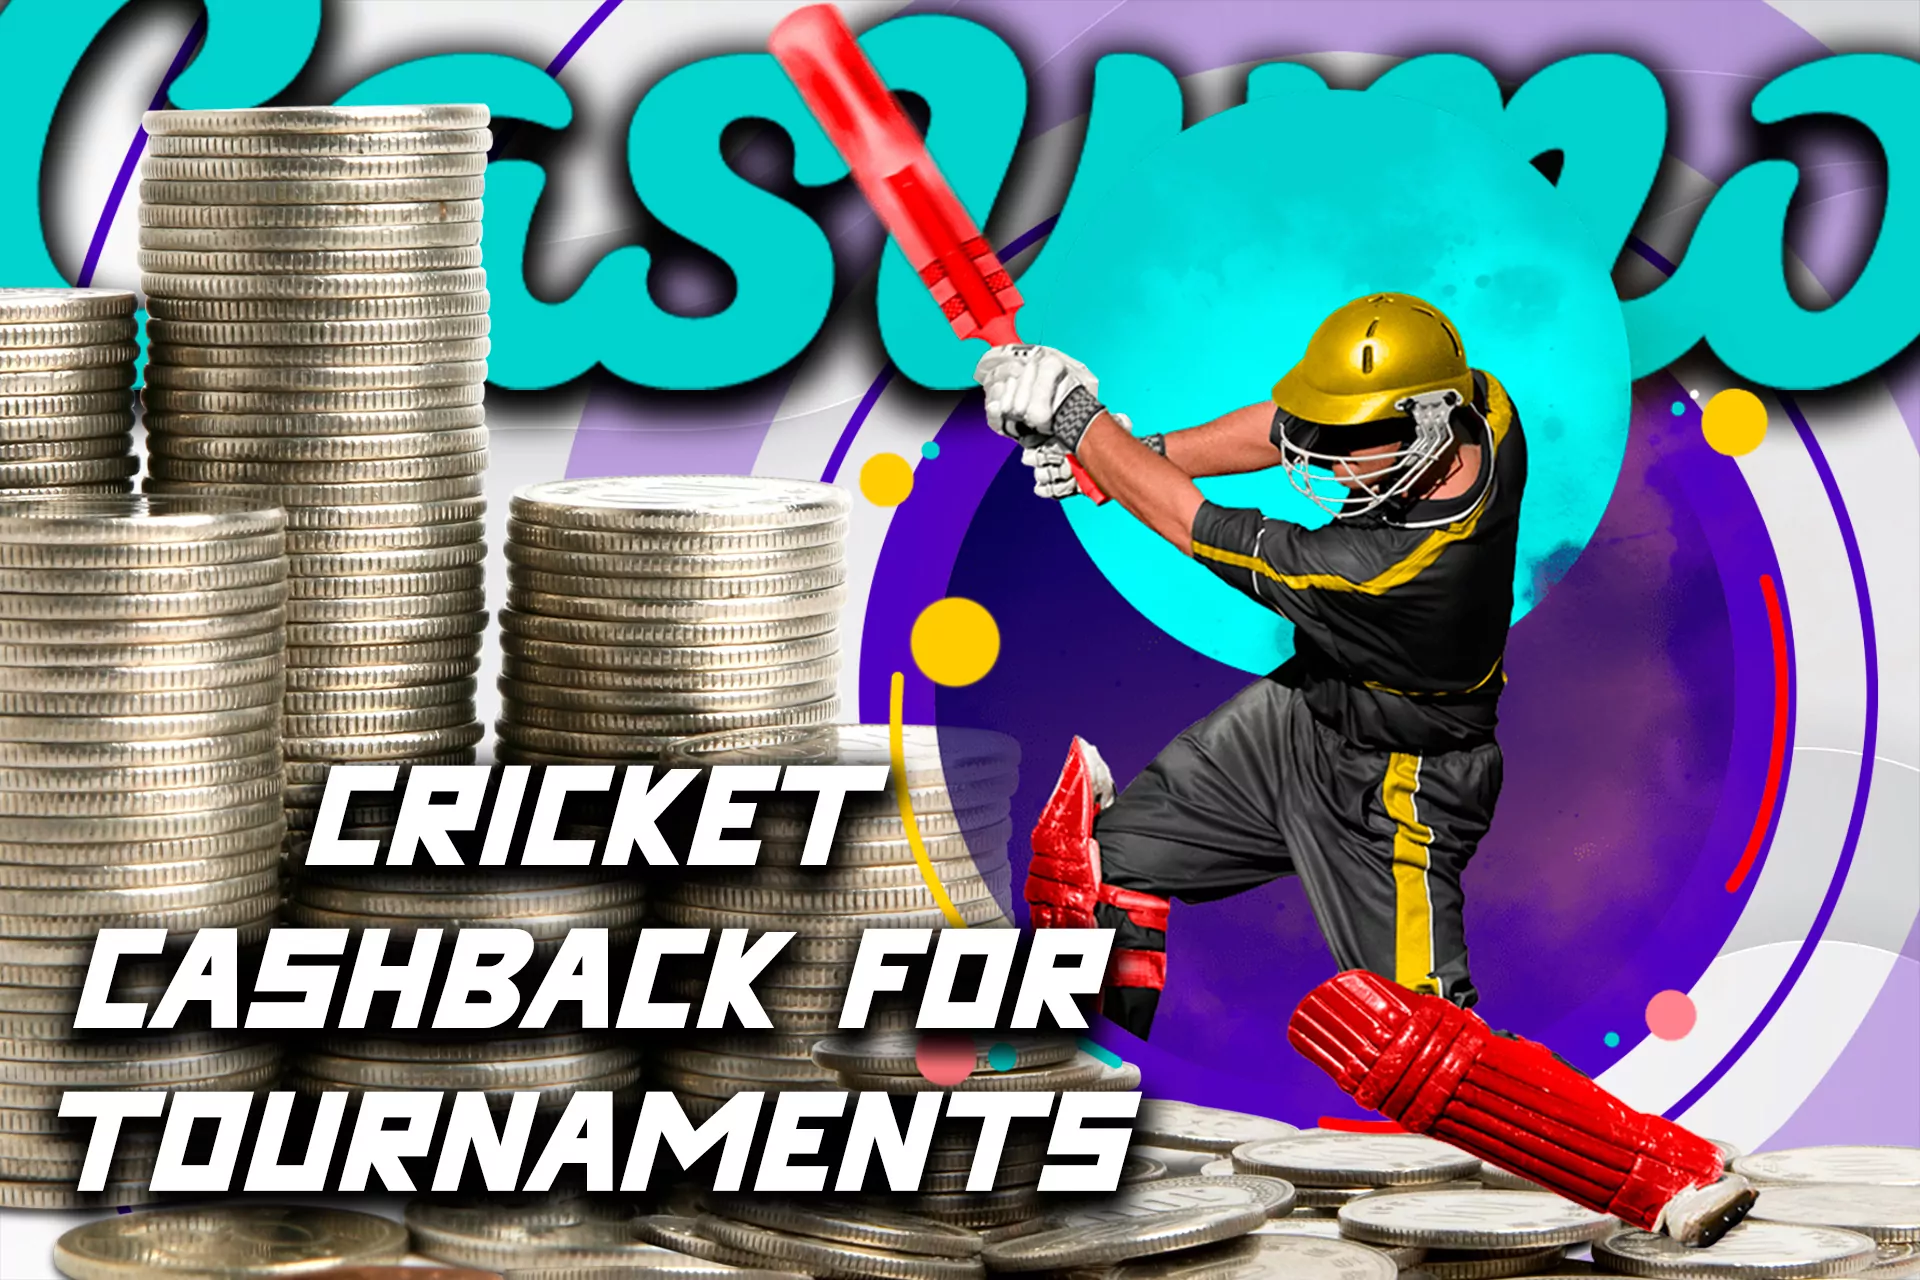 On Casumo you often can get a cashback for betting on cricket matches.